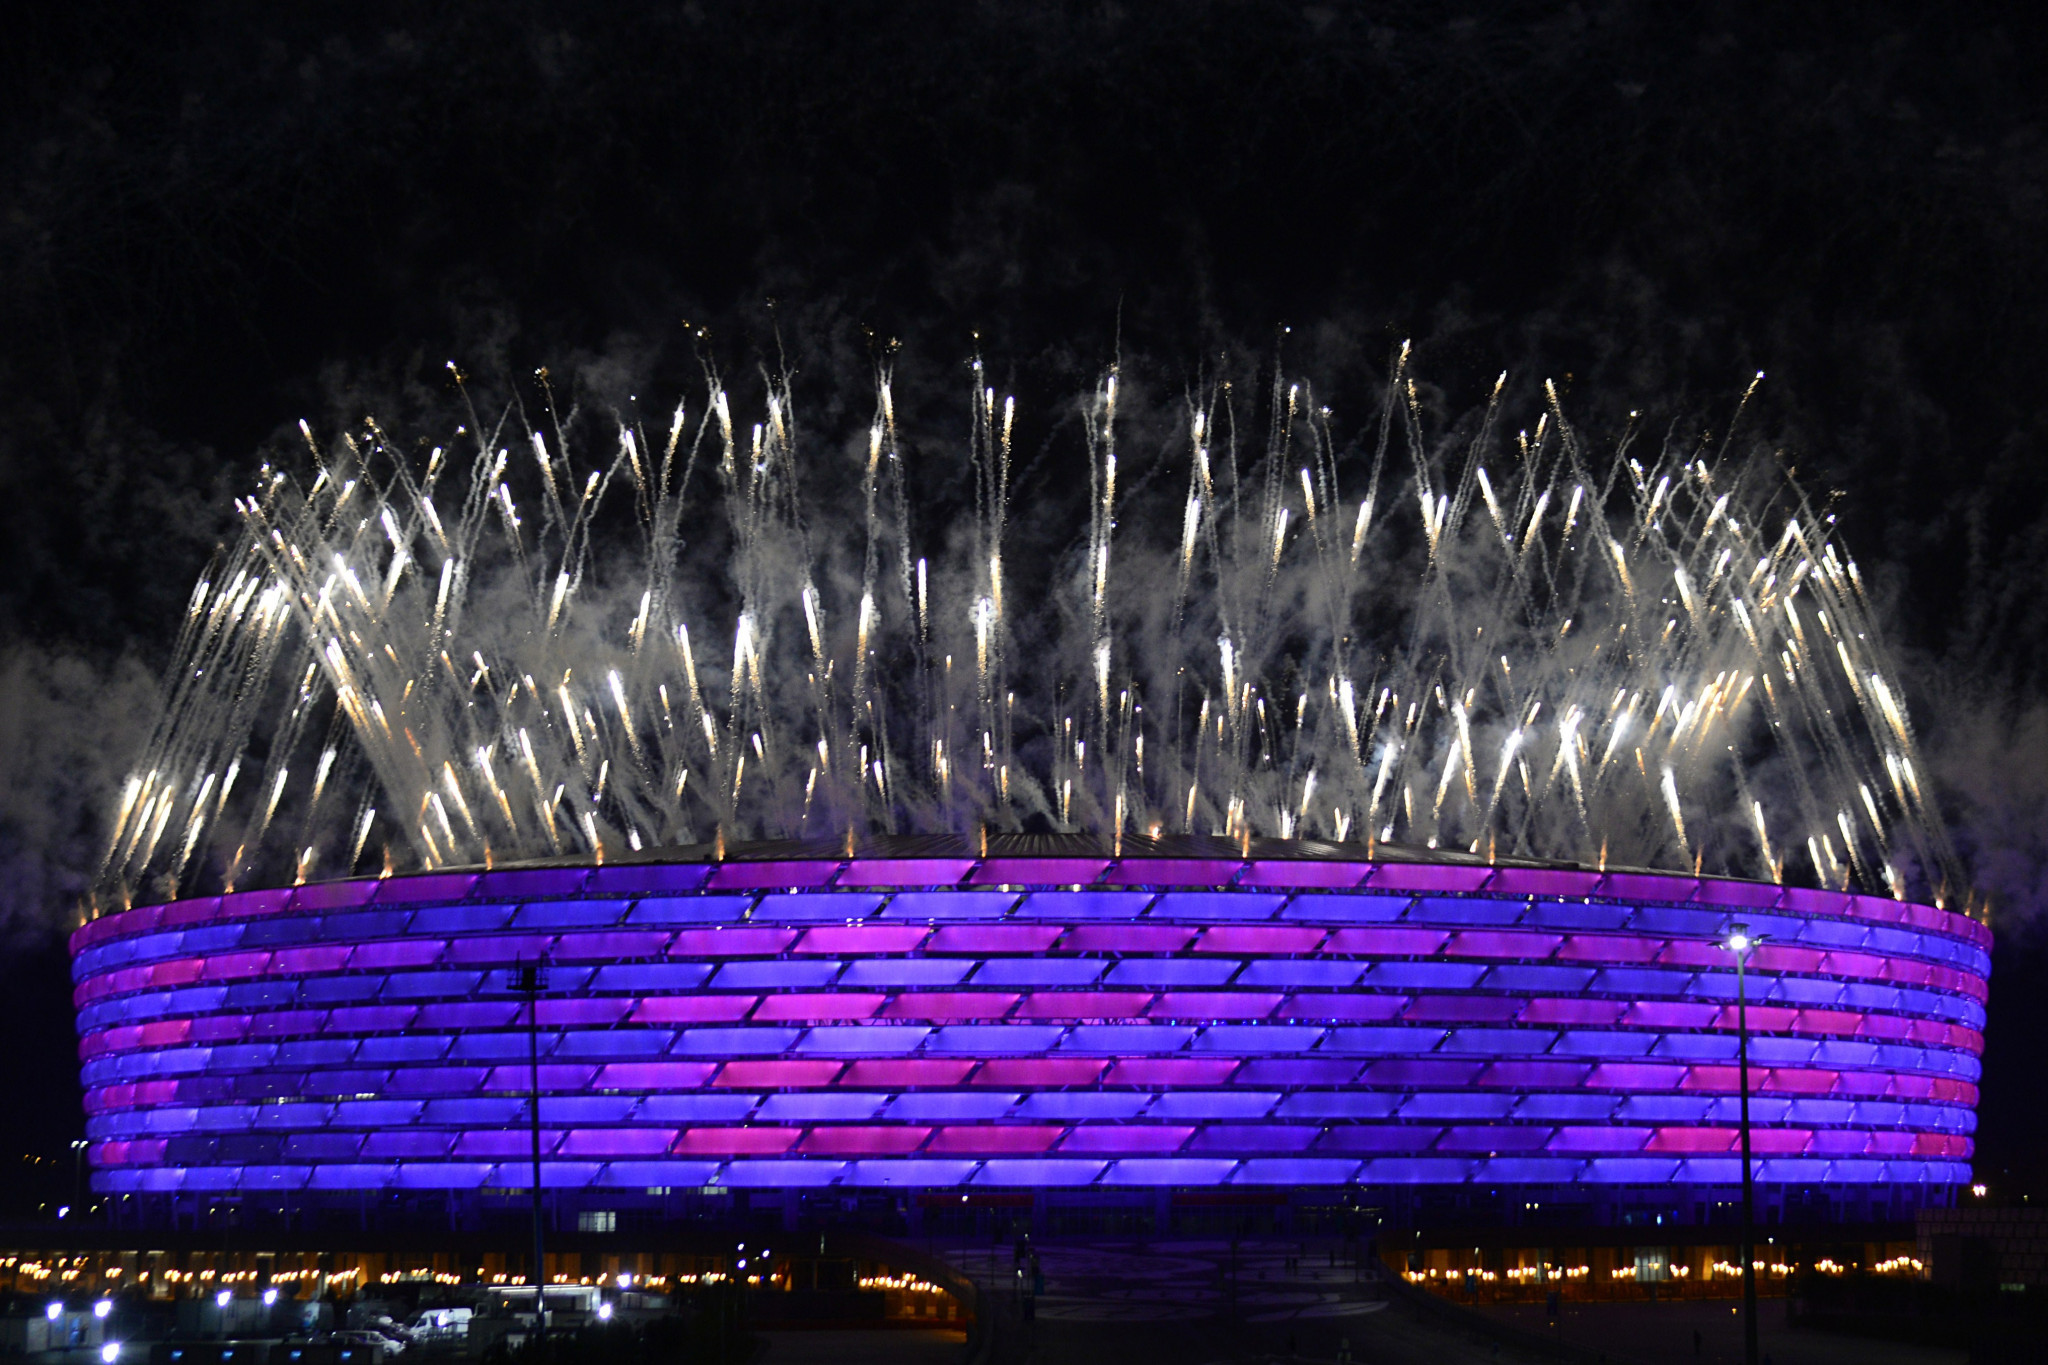 The build-up to the Baku 2015 European Games was dominated by concerns over human rights and censorship ©Getty Images